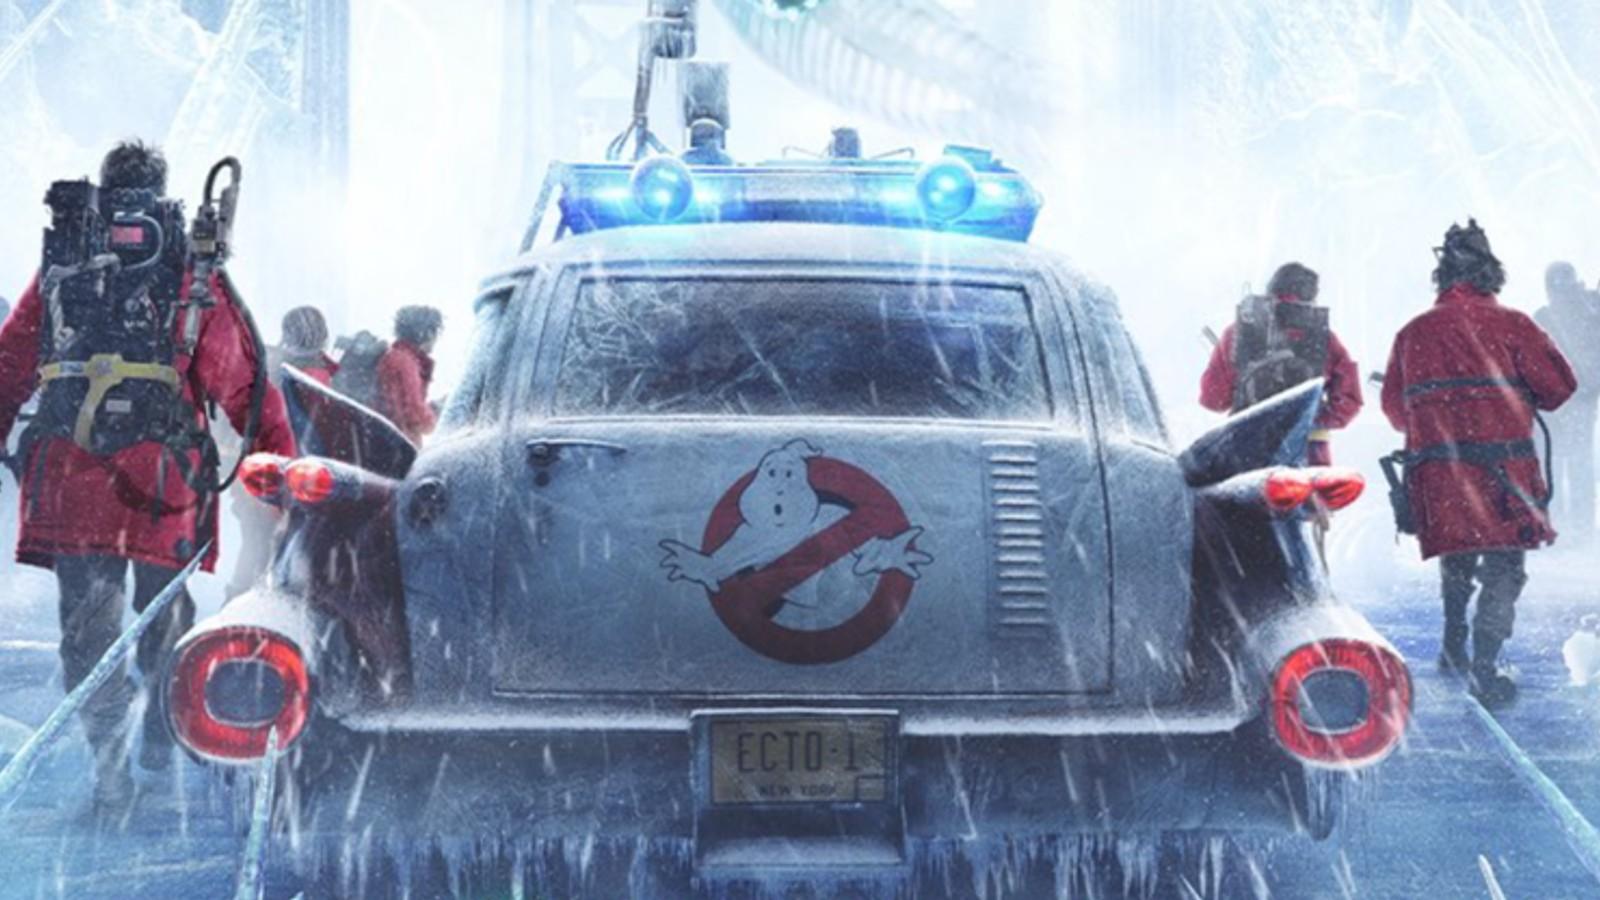 The Ghostbuster running alongside their iconic car ECTO-1.